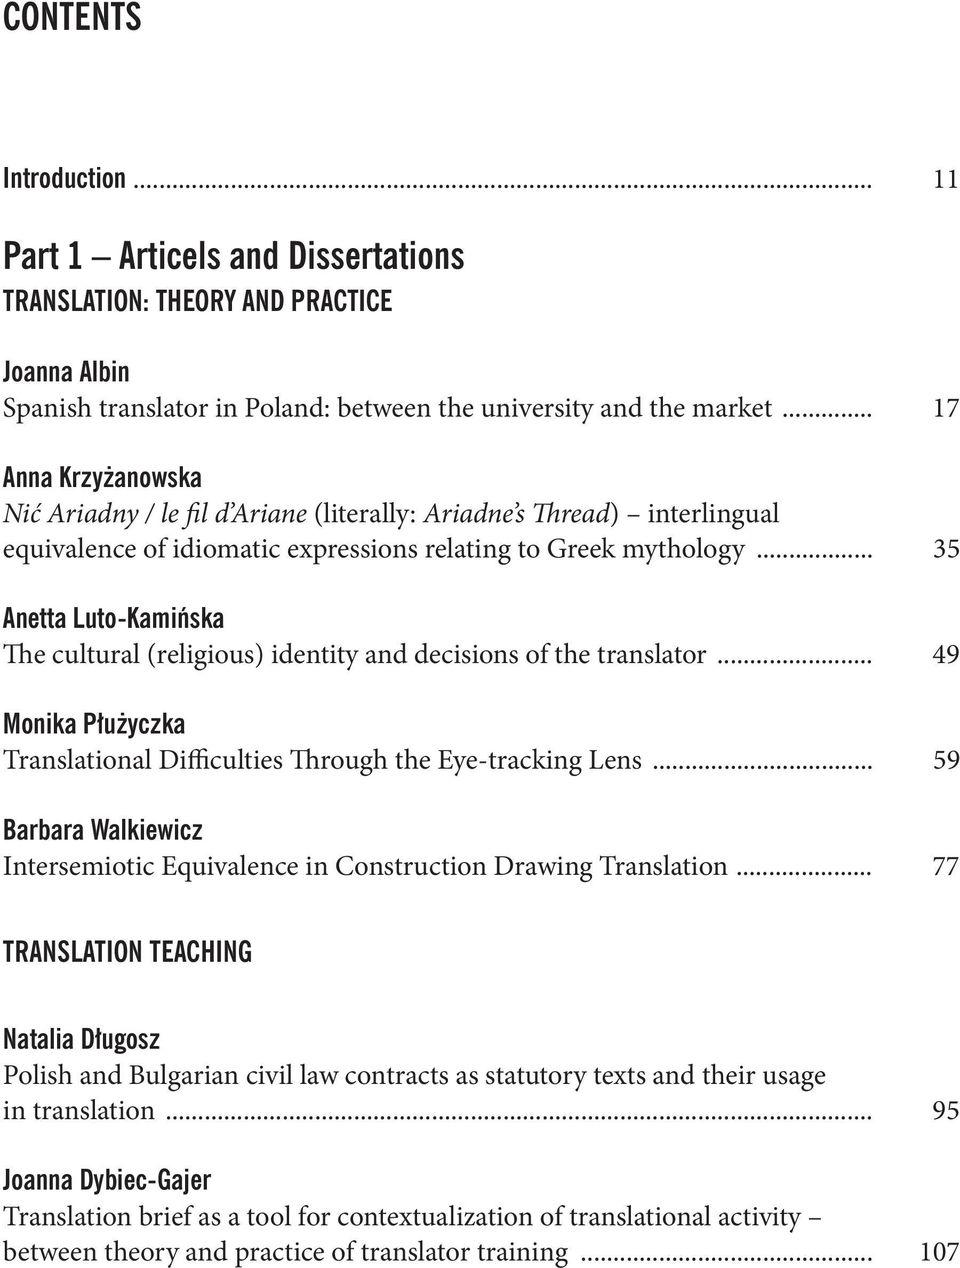 .. 35 The cultural (religious) identity and decisions of the translator... 49 Translational Difficulties Through the Eye-tracking Lens.